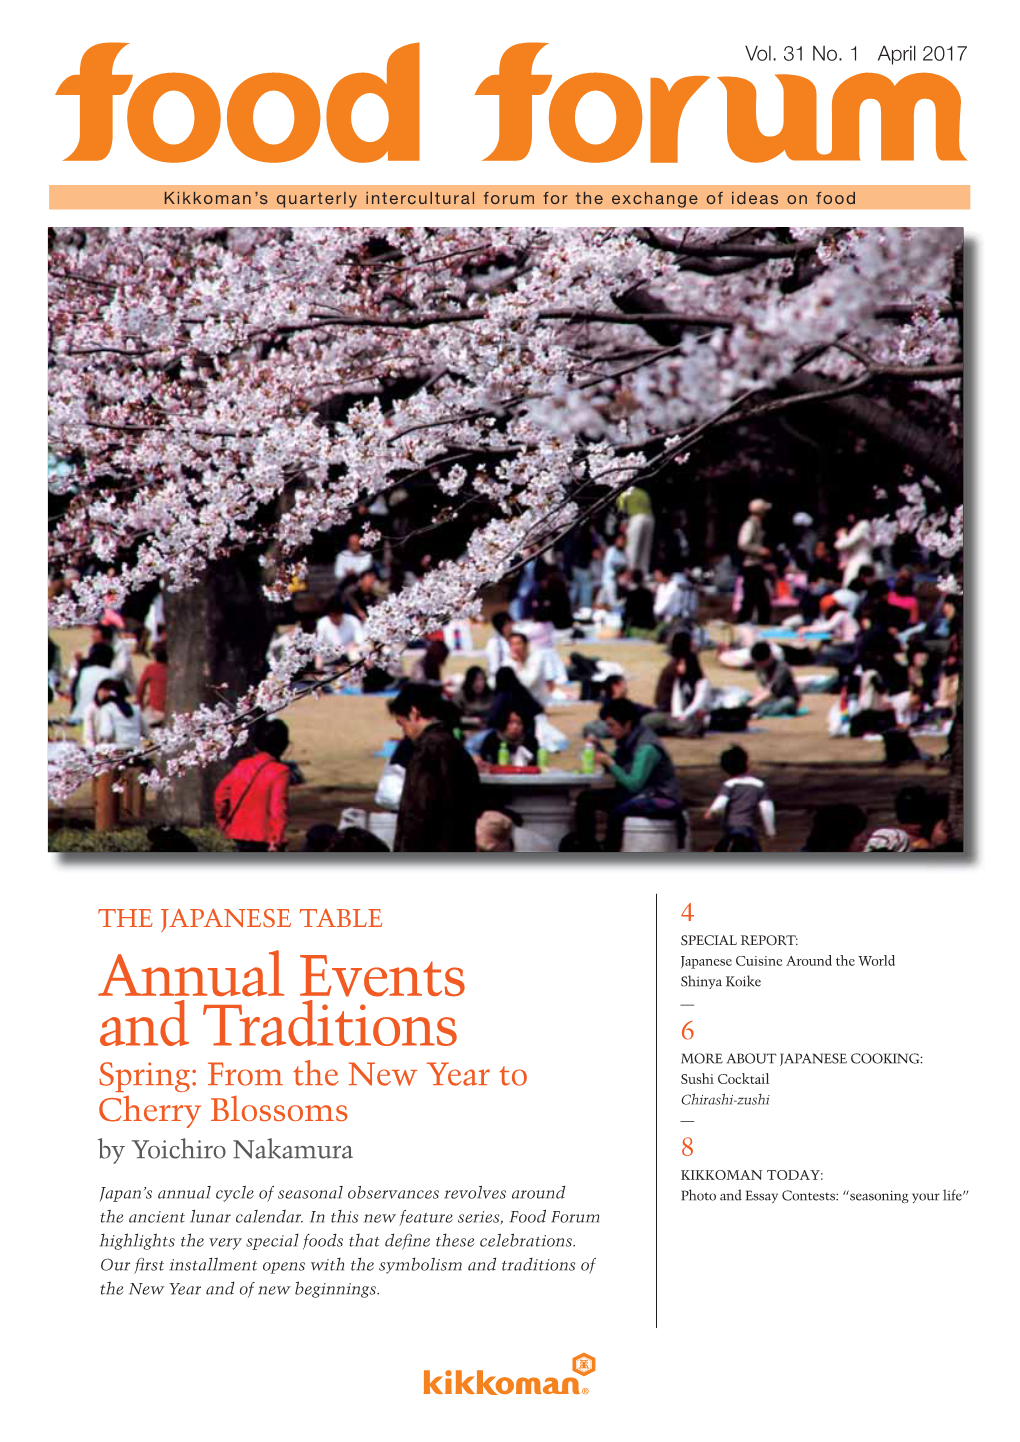 Annual Events and Traditions Spring: from the New Year to Cherry Blossoms